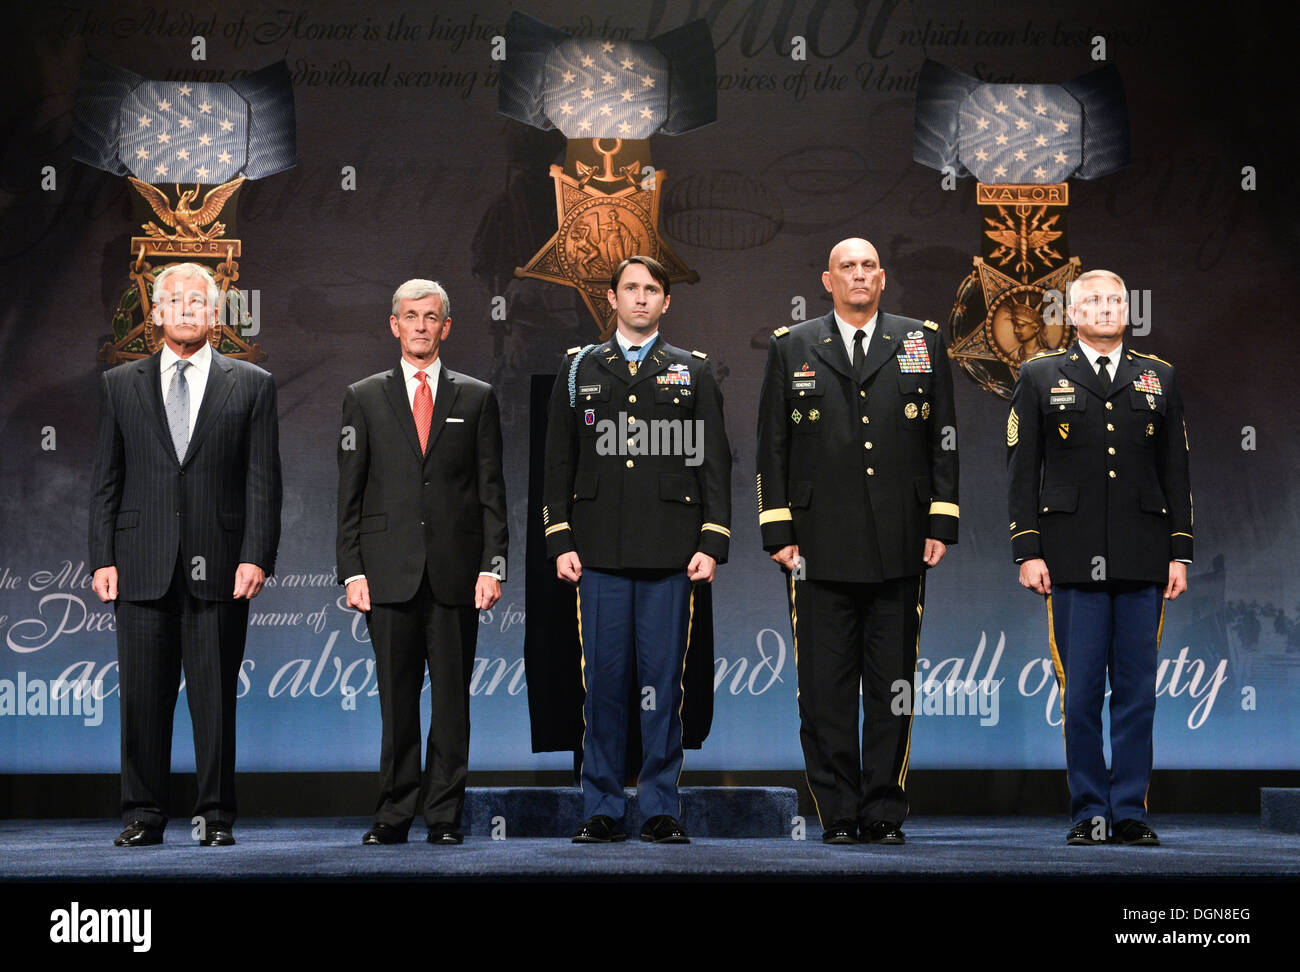 From left to right, Secretary of Defense Chuck Hagel, Secretary of the Army John McHugh, Former U.S. Army Capt. William D. Swenson, Chief of Staff of the Army Gen. Raymond T. Odierno, Sgt. Maj. of the Army Raymond F. Chandler III standing on stage at his Stock Photo